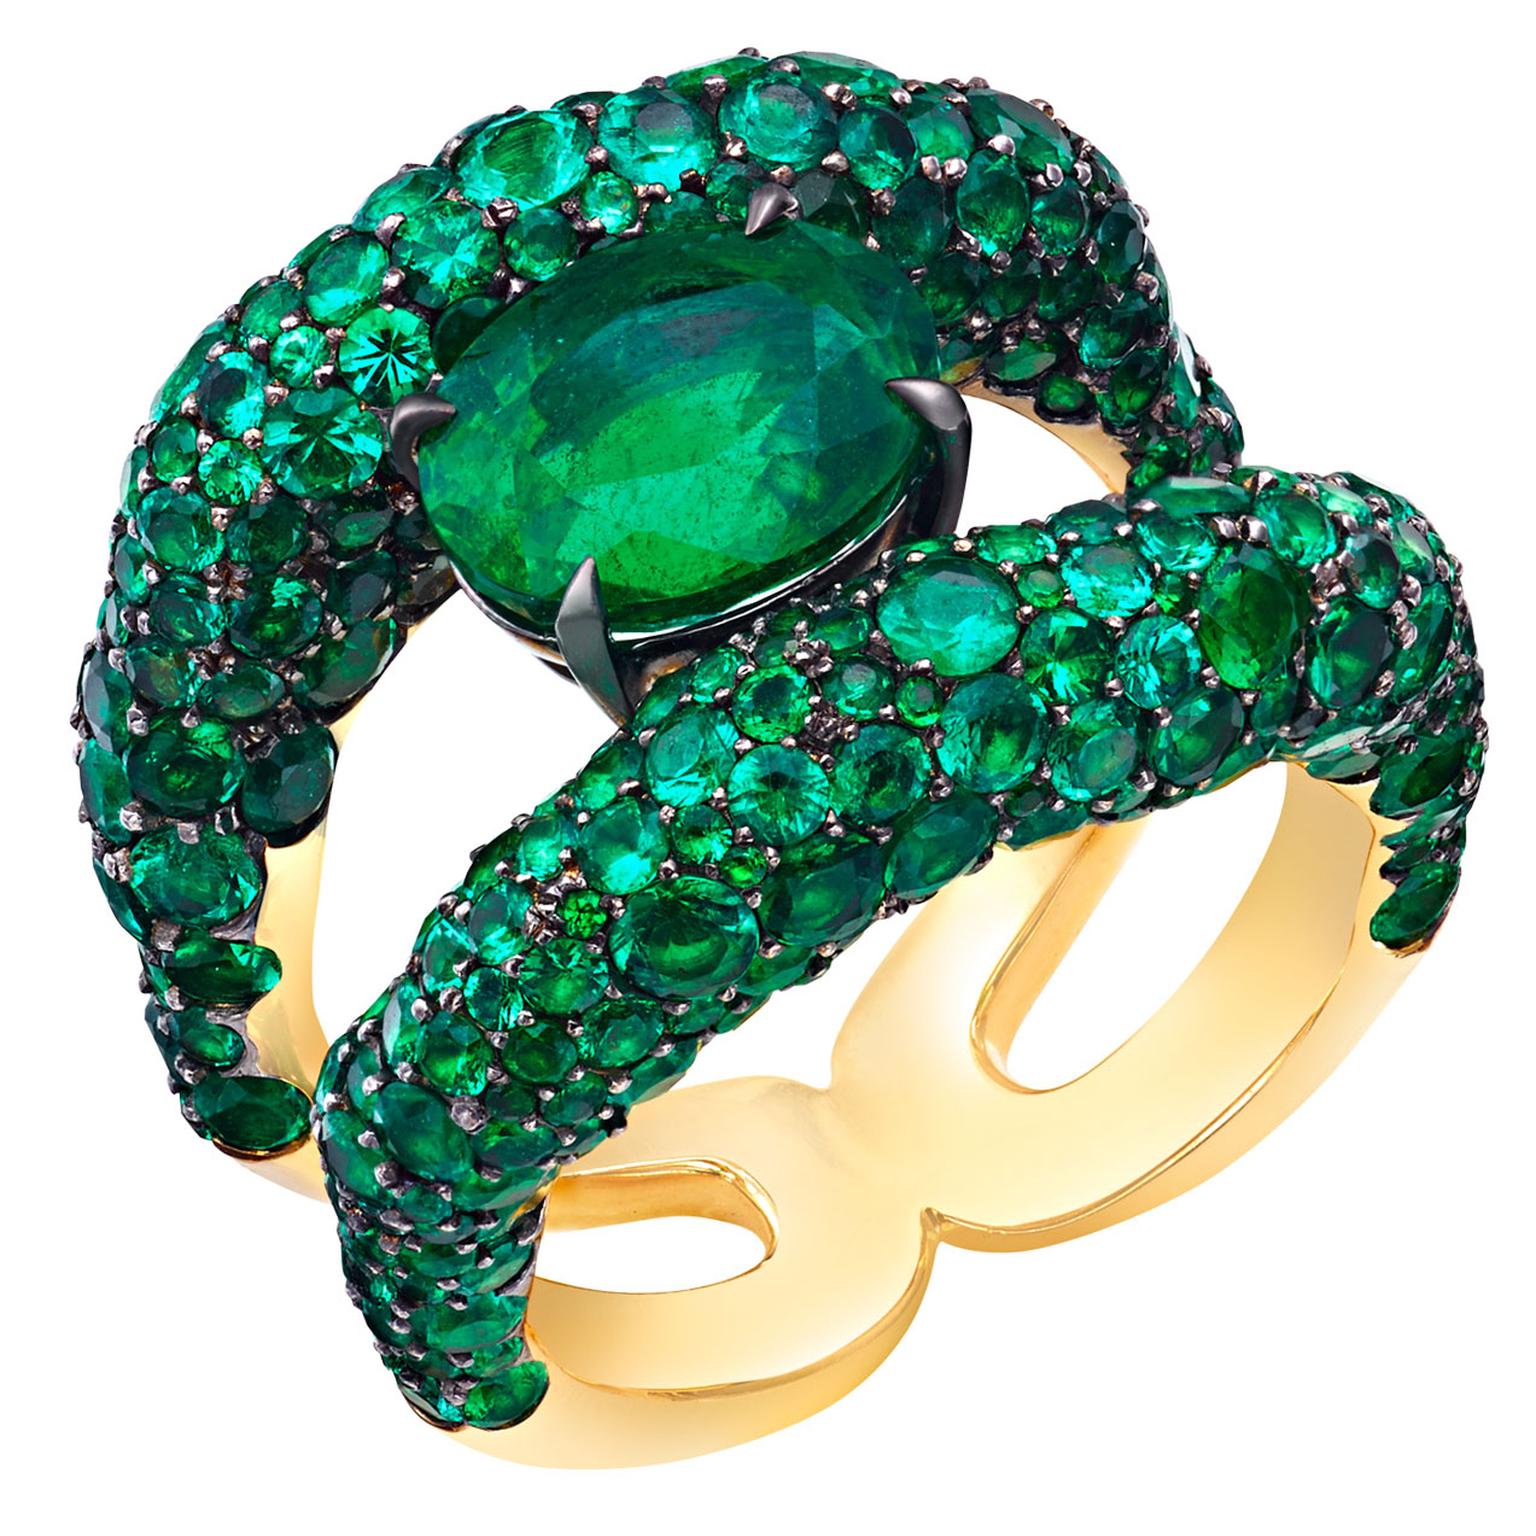 Fabergé Emotion Charmeuse emerald ring